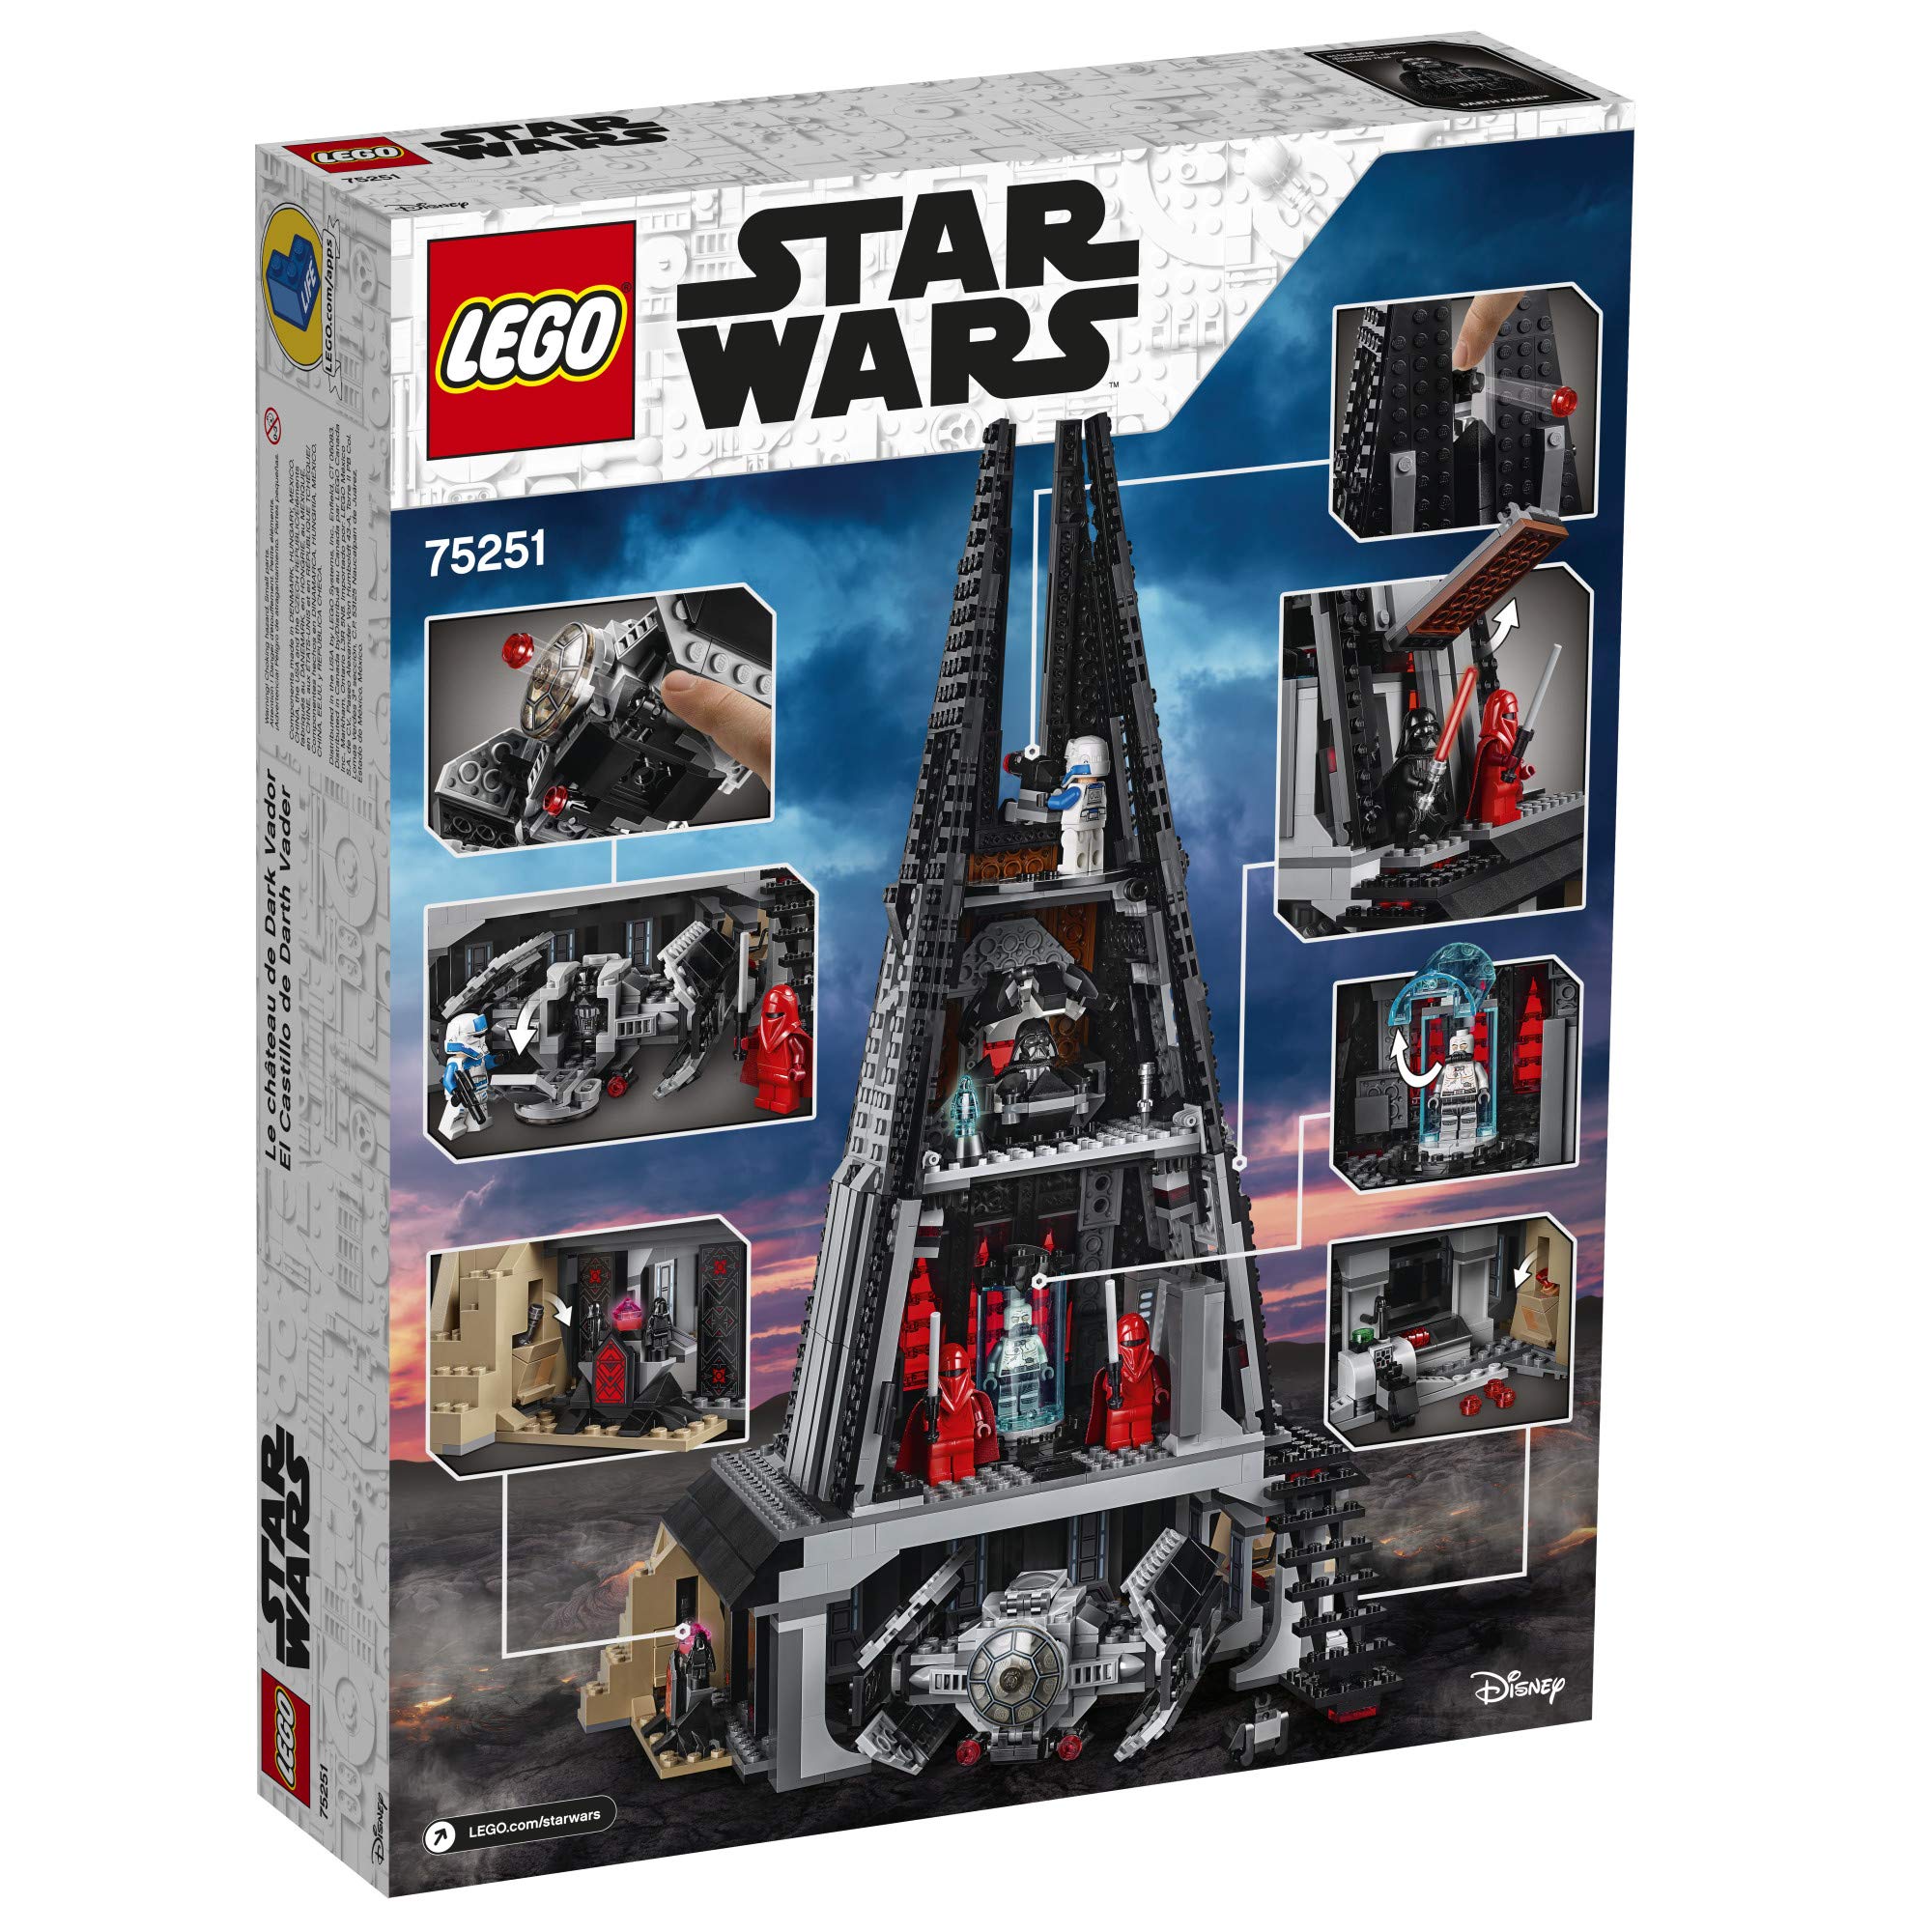 LEGO Star Wars Darth Vader's Castle 75251 Building Kit Includes TIE Fighter, Darth Vader Minifigures, Bacta Tank and More (1,060 Pieces) - (Amazon Exclusive)